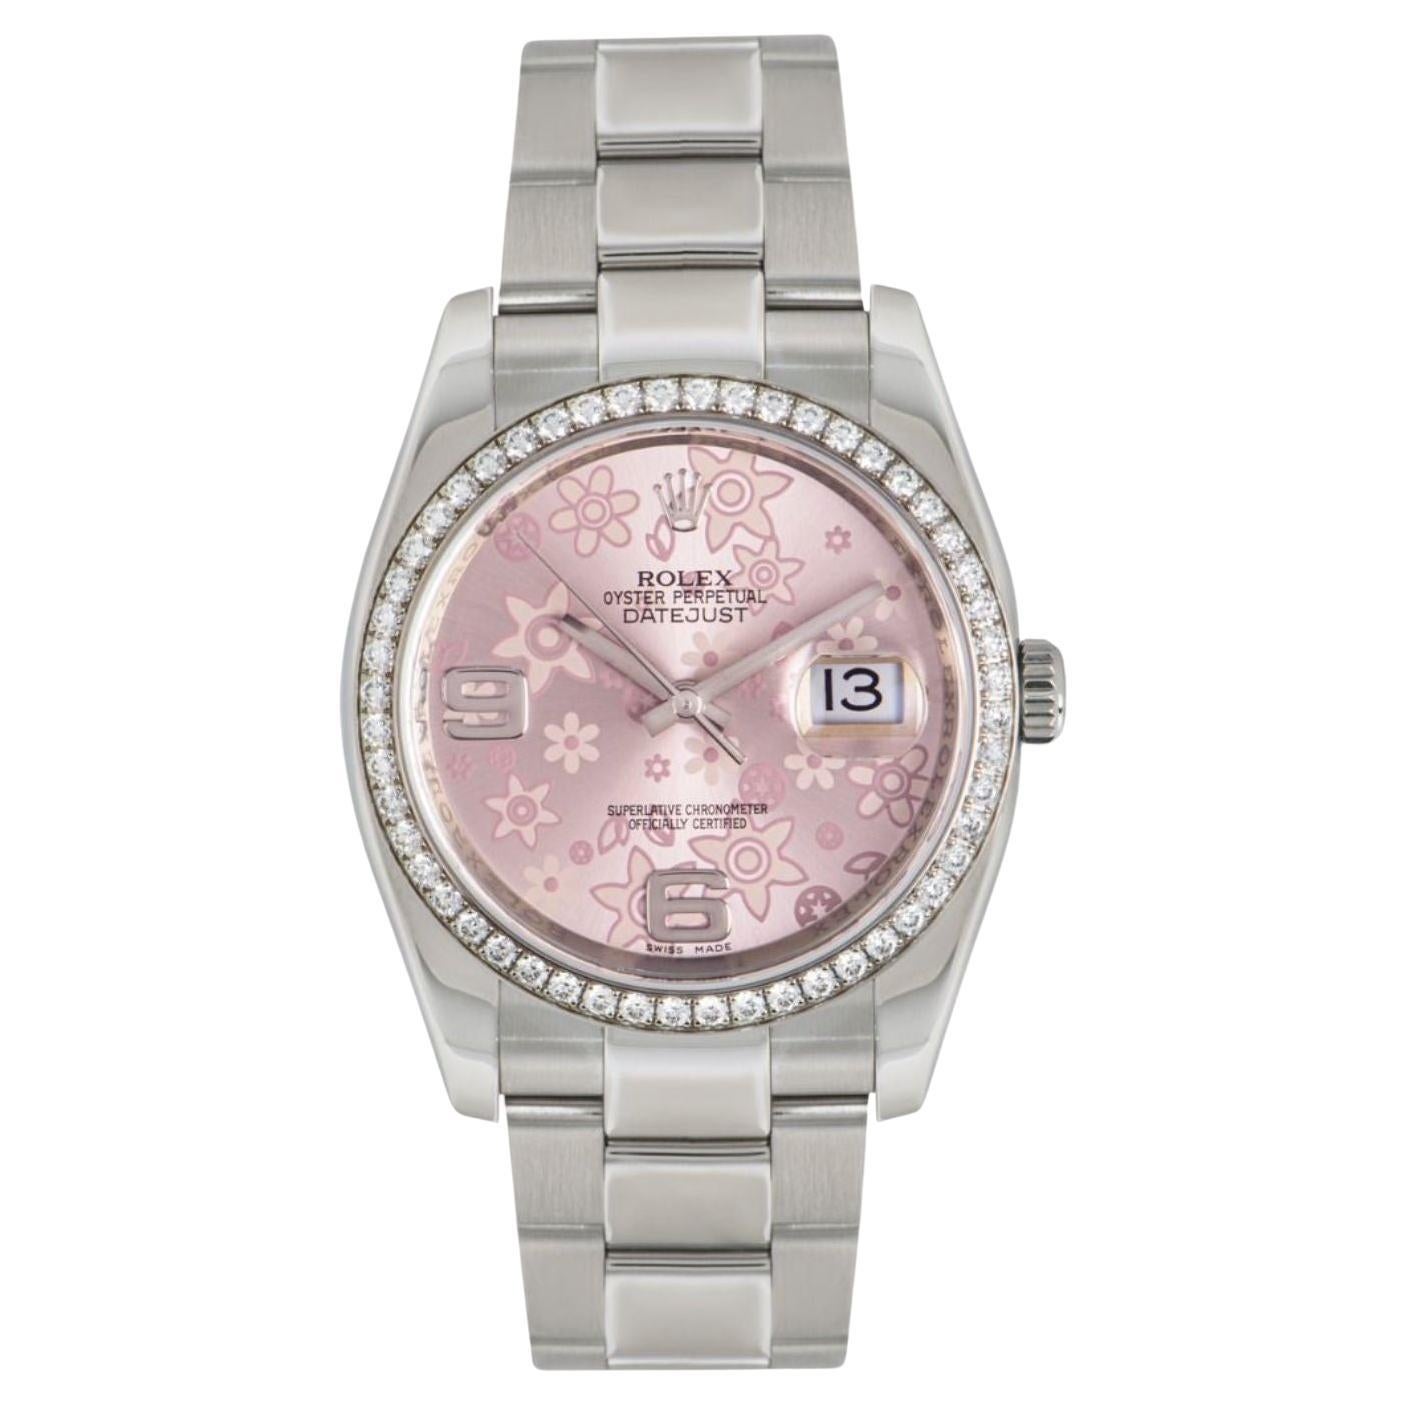 Rolex DateJust Pink Floral Dial 116244 Watch For Sale